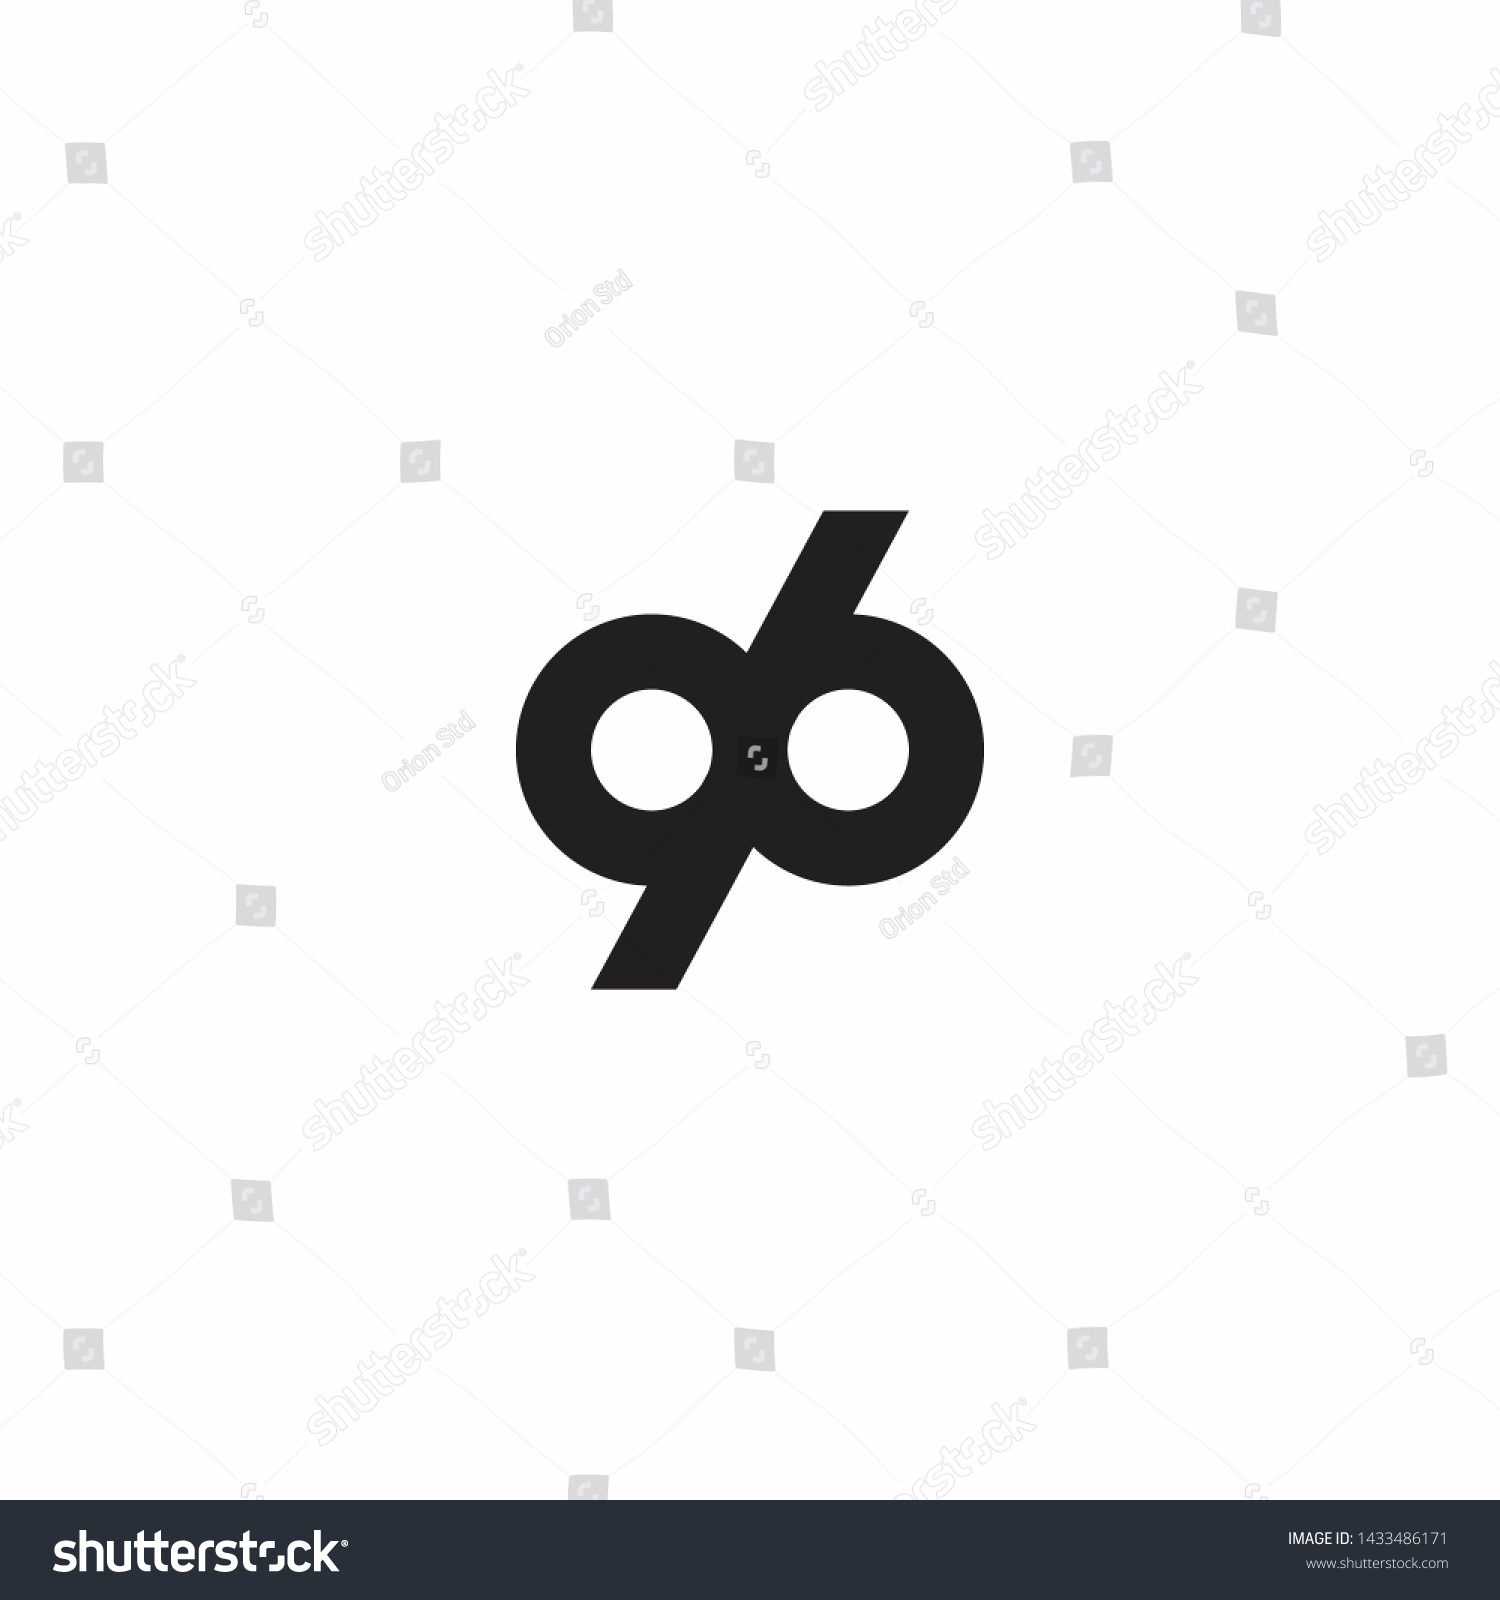 96 Number Logo Icon Design Vector Stock Vector (Royalty Free ...